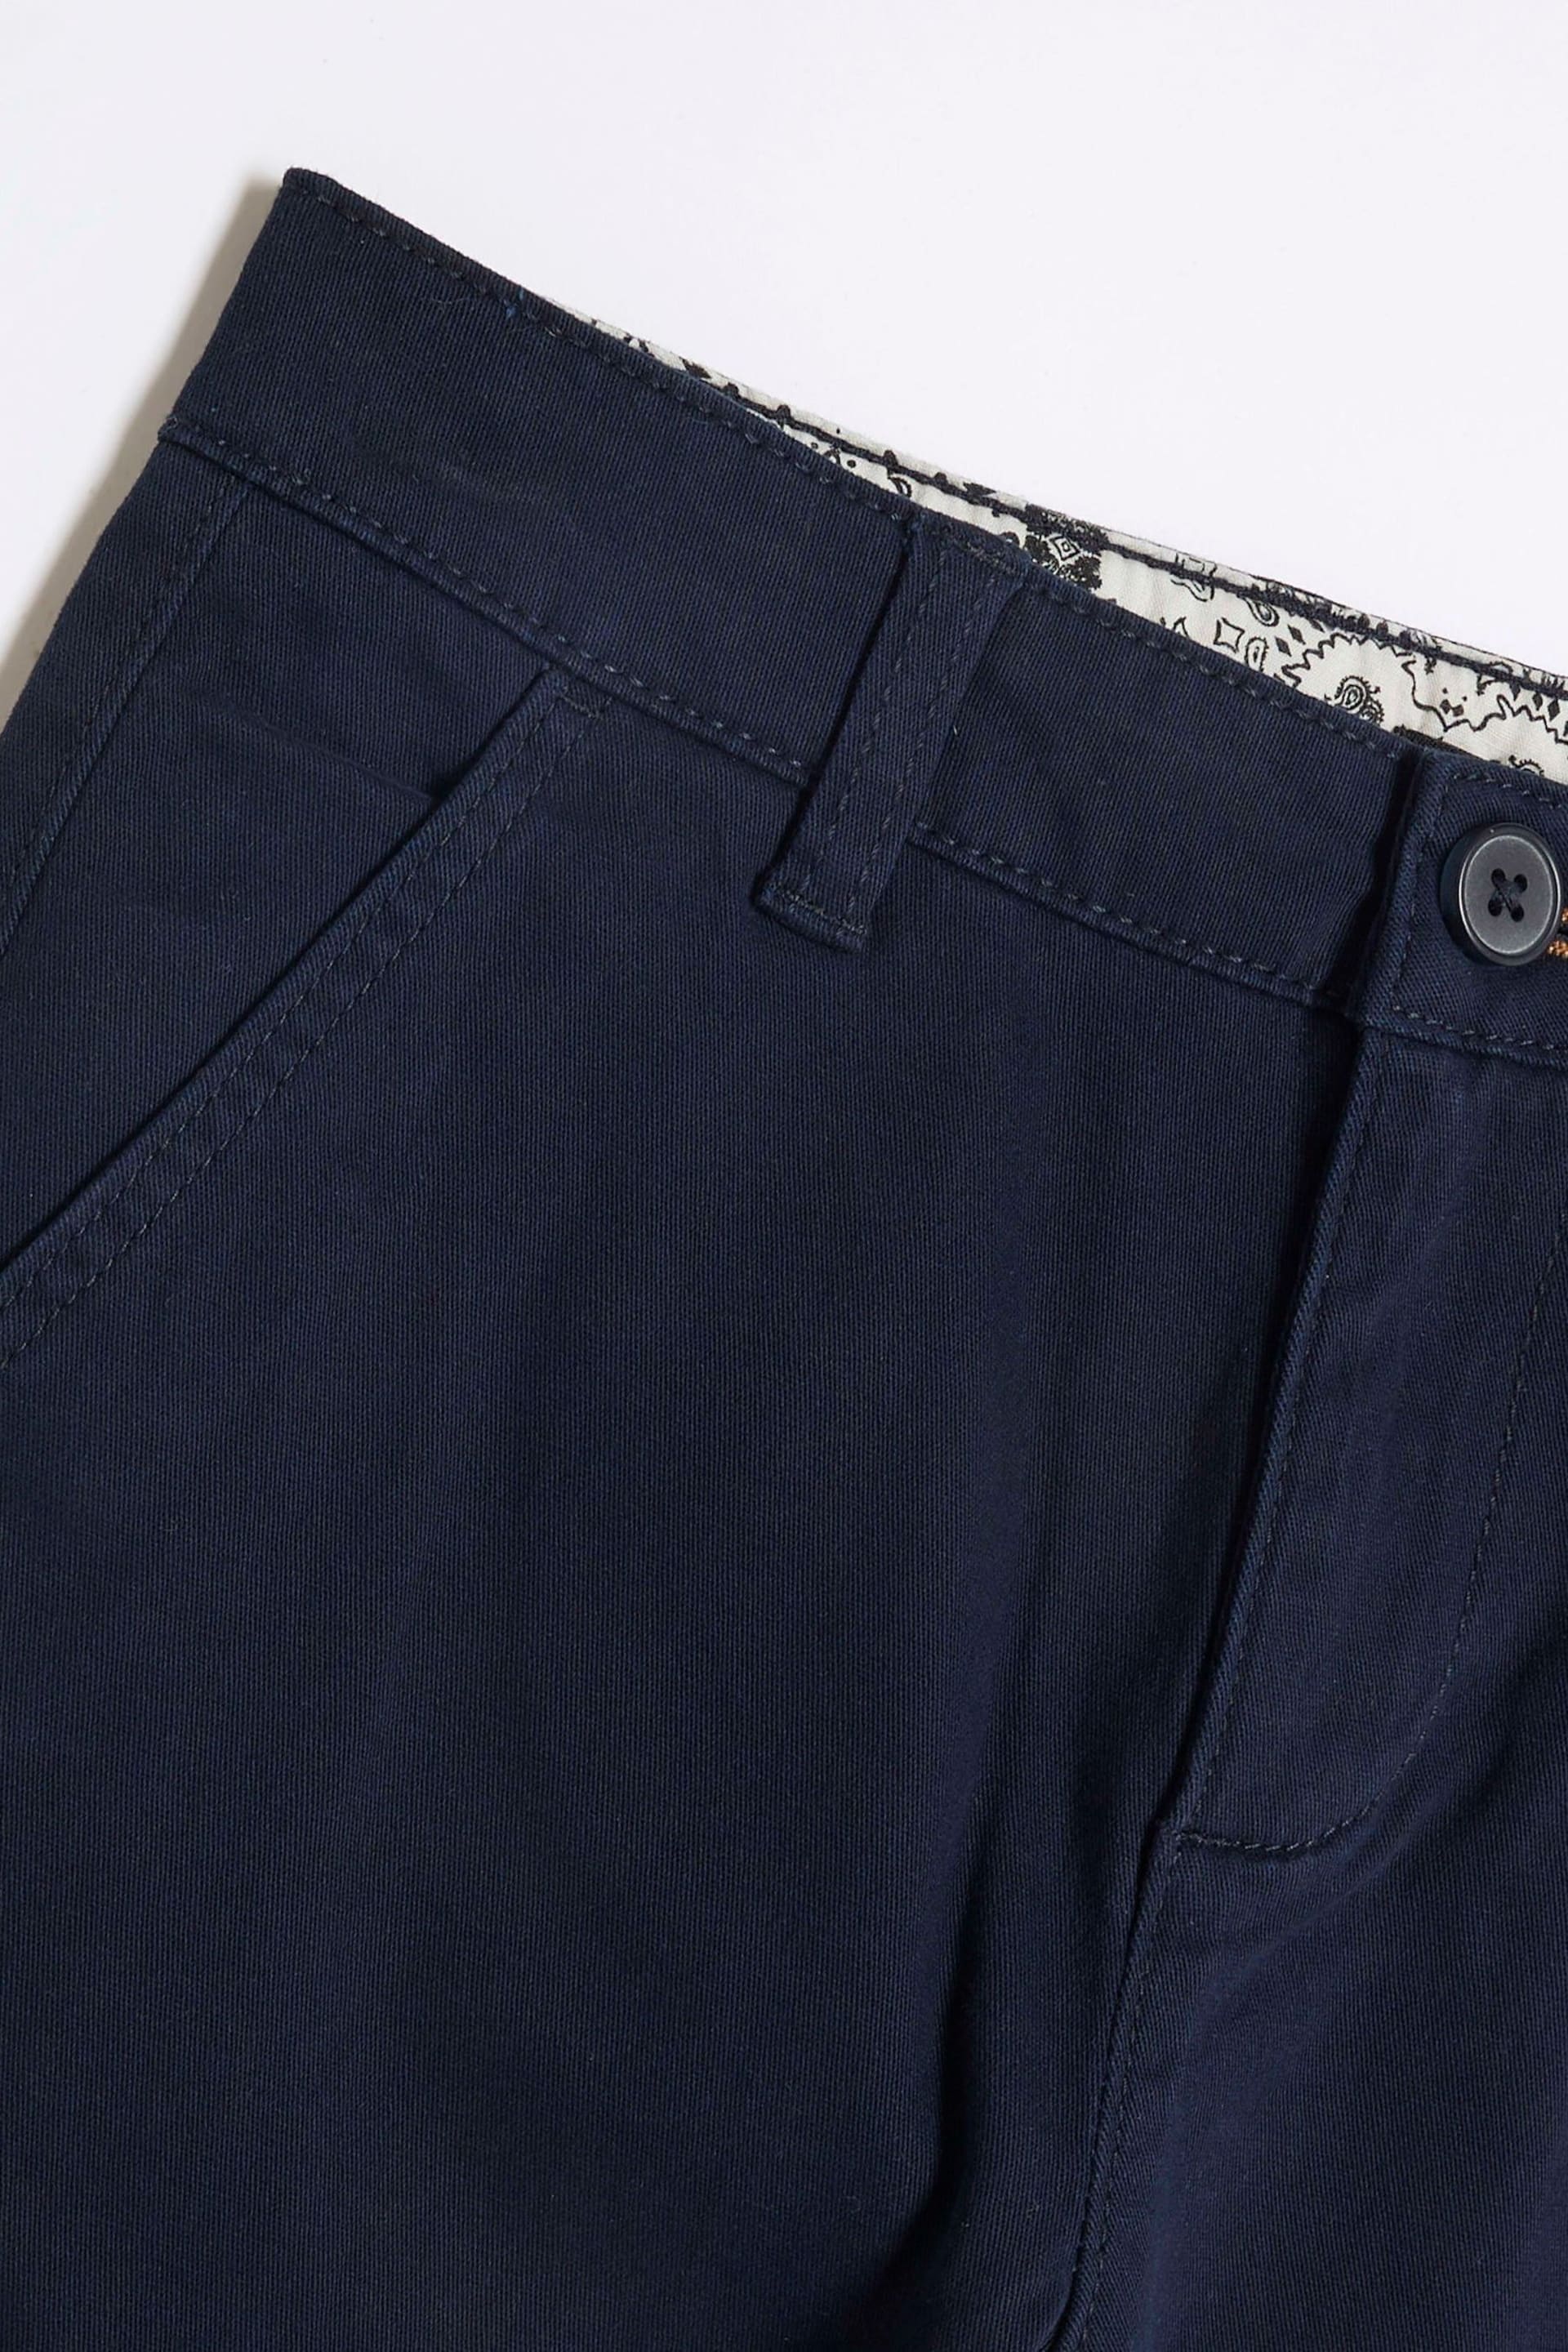 River Island Blue Boys Chinos Trousers - Image 3 of 3